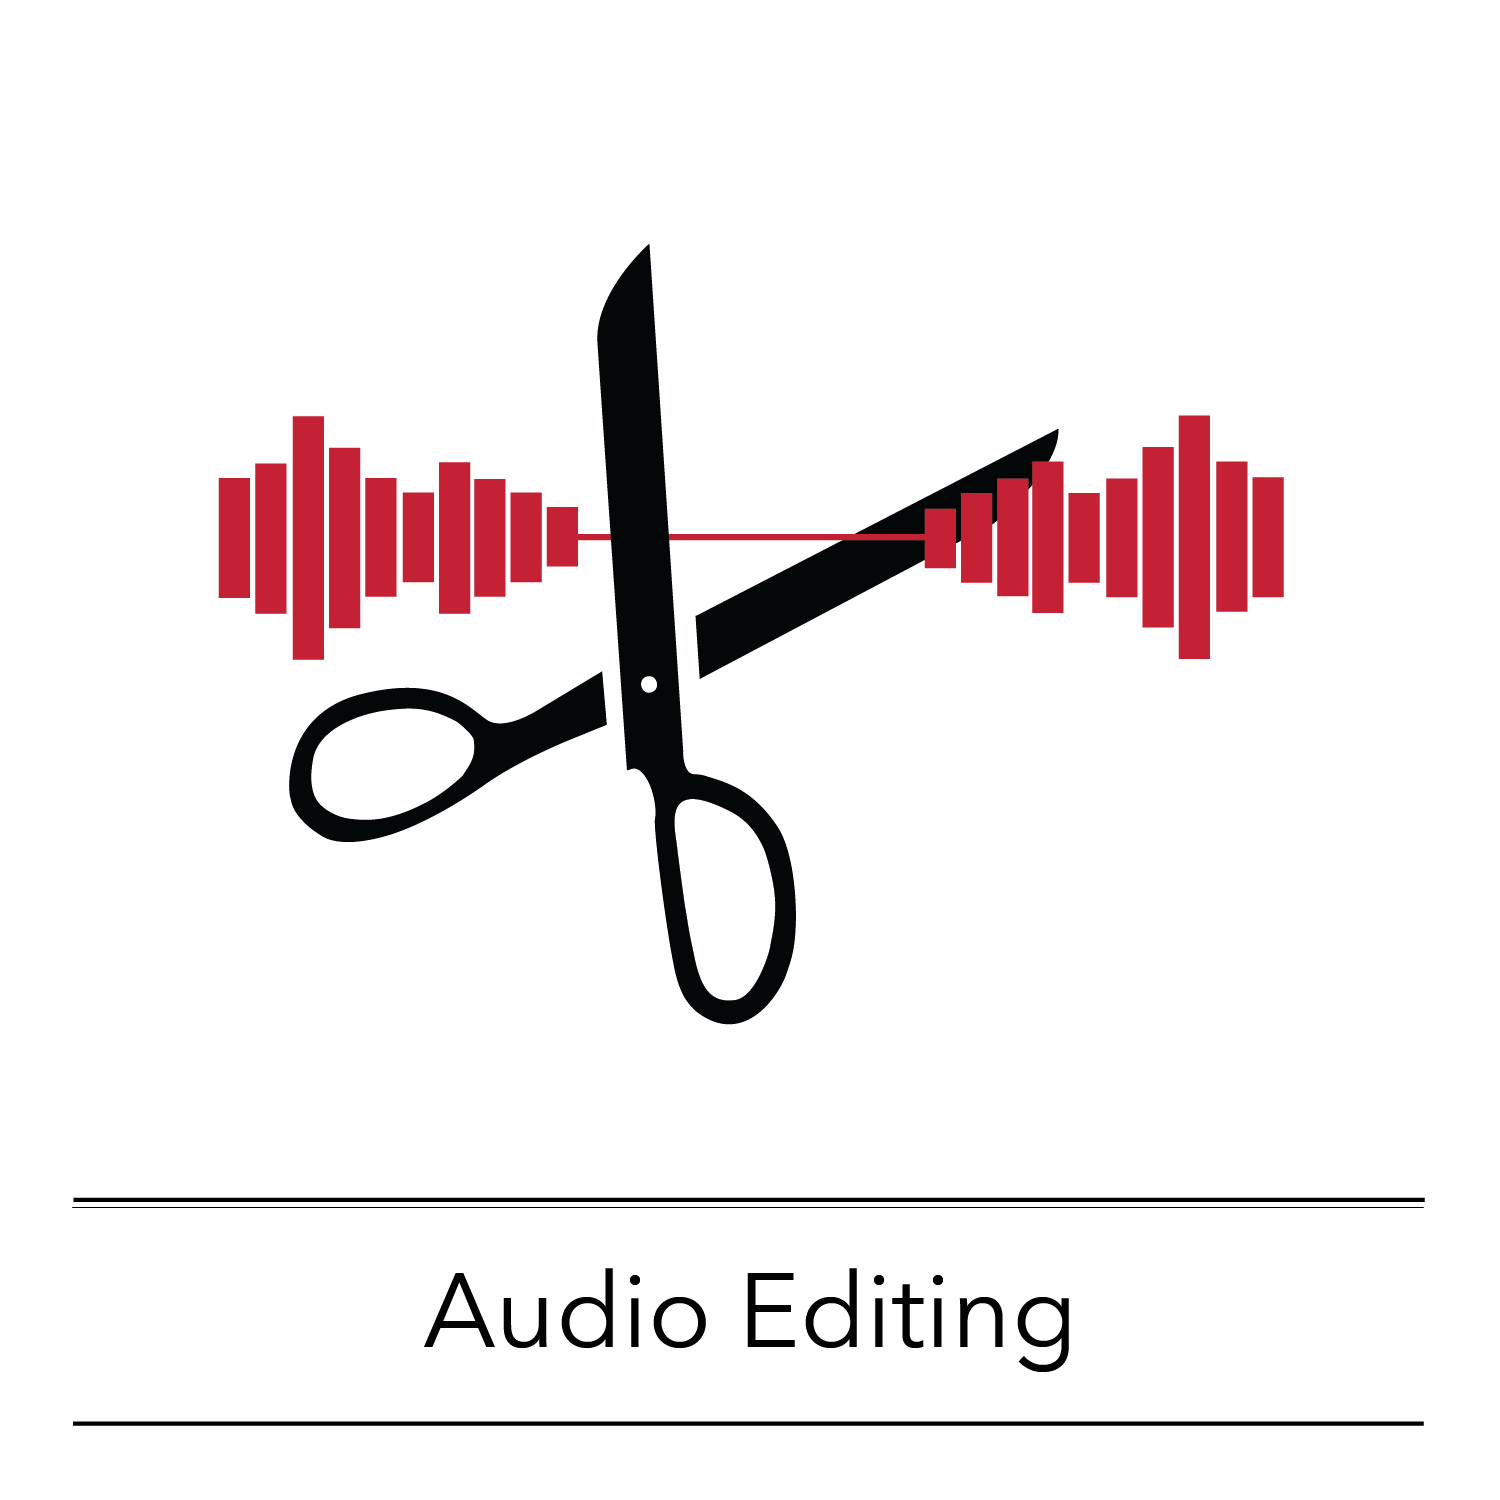 OHC workshop icon for Audio Editing: A pair of scissors positioned to cut through a red waveform, text under image reads: Audio Editing.